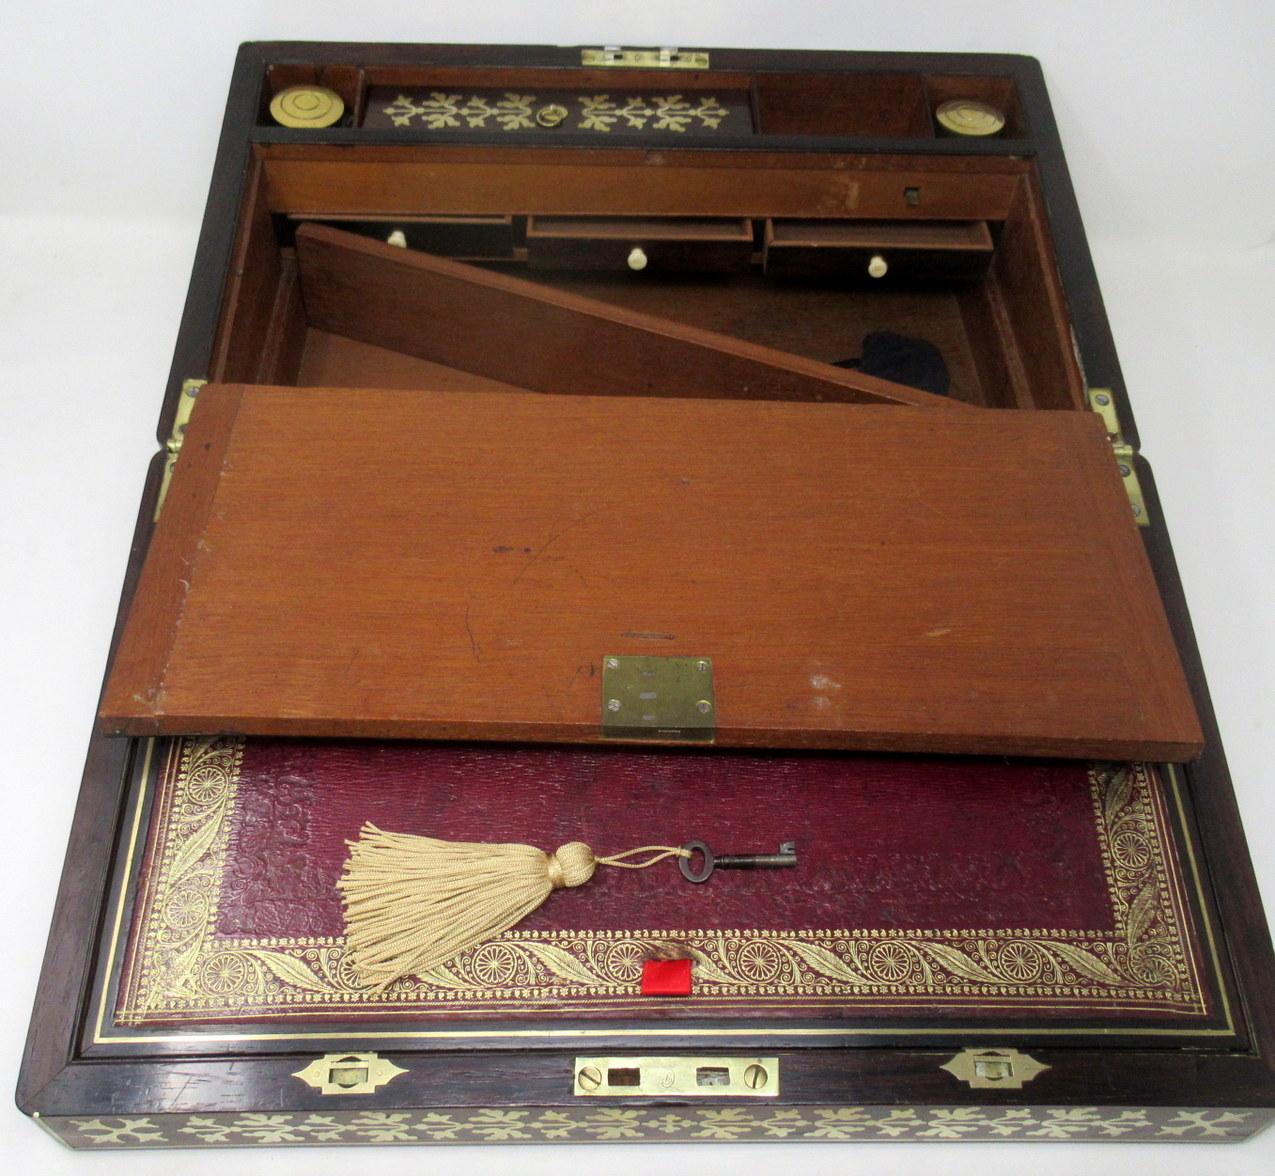 19th Century Antique Regency Brass Inlaid Mahogany Traveling Desk Wooden Writing Slope Box For Sale